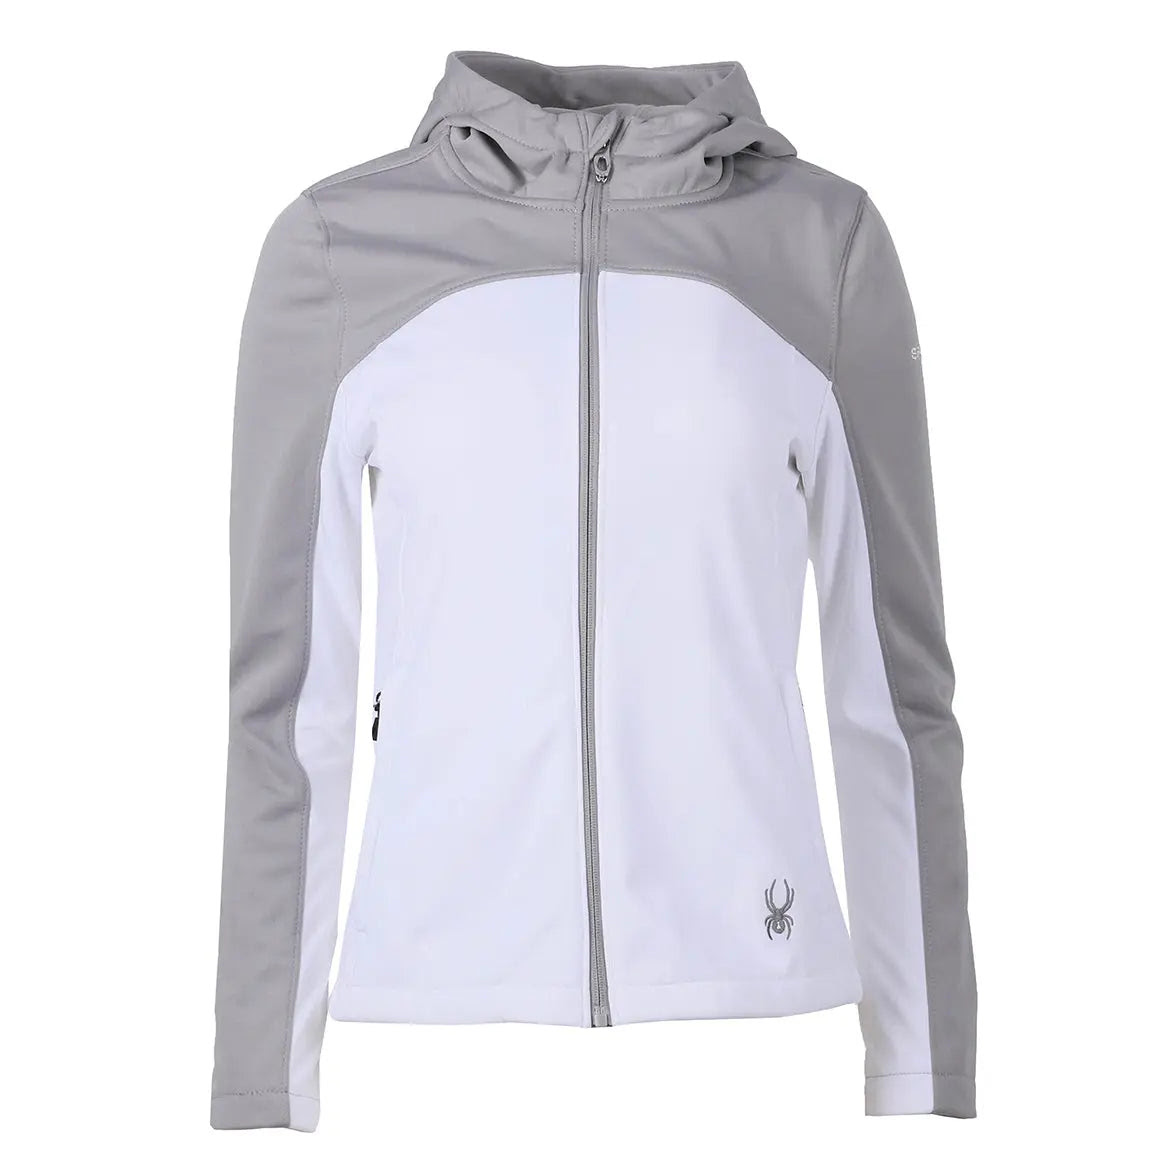 Spyder Women's Alyce Softshell Jacket With Hood for $49.99+FS!